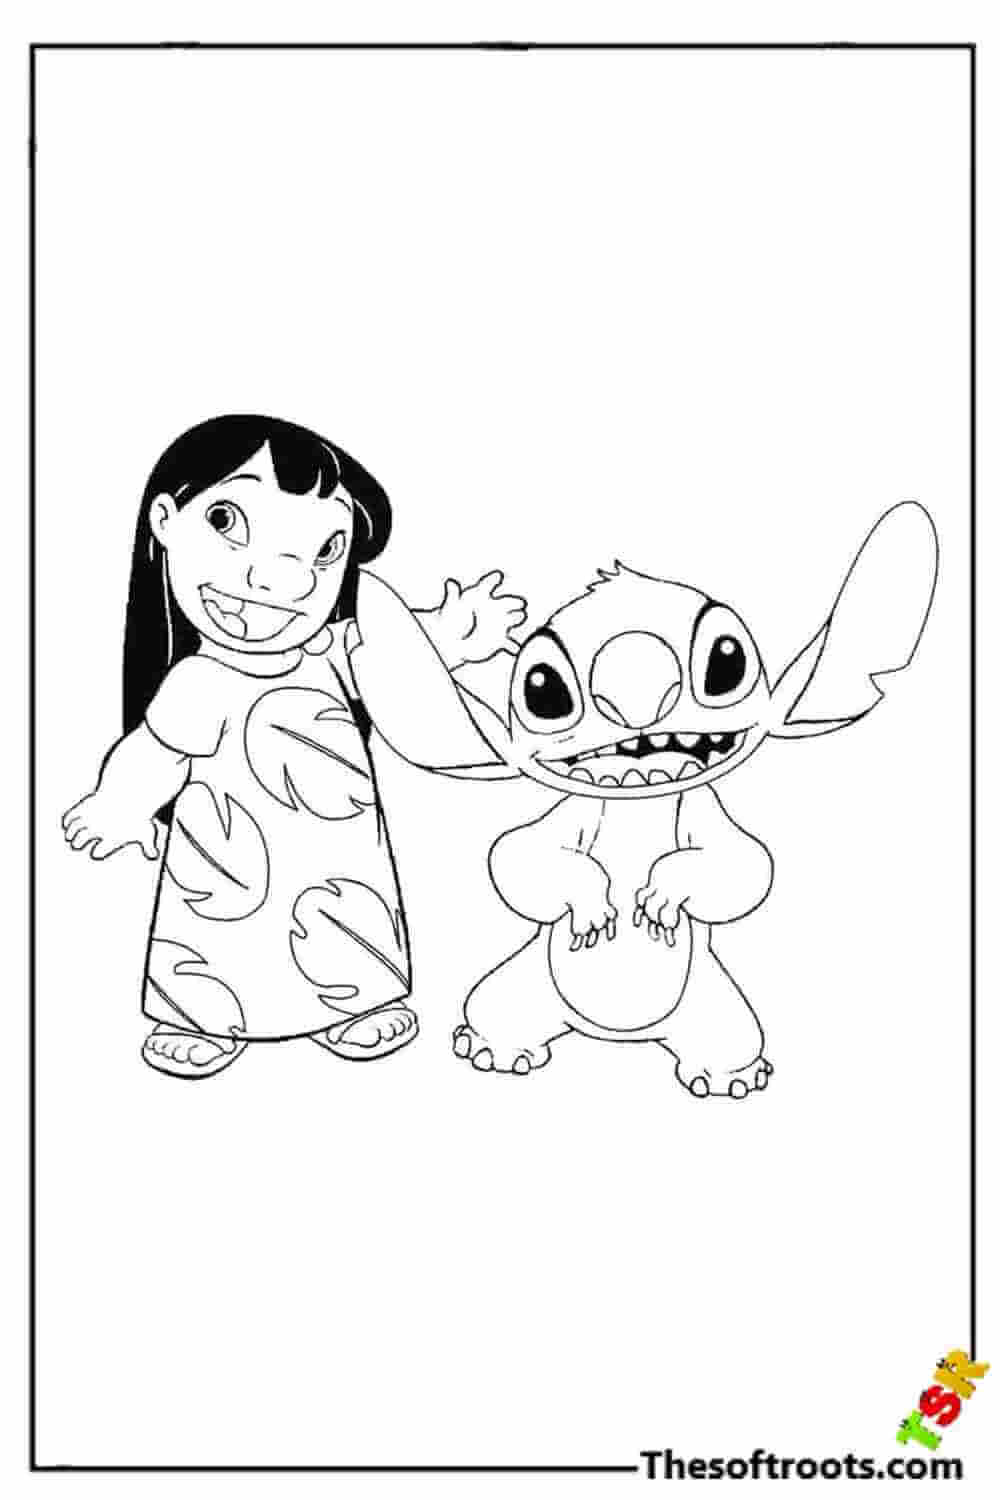 Lilo and Stitch are Happy coloring pages